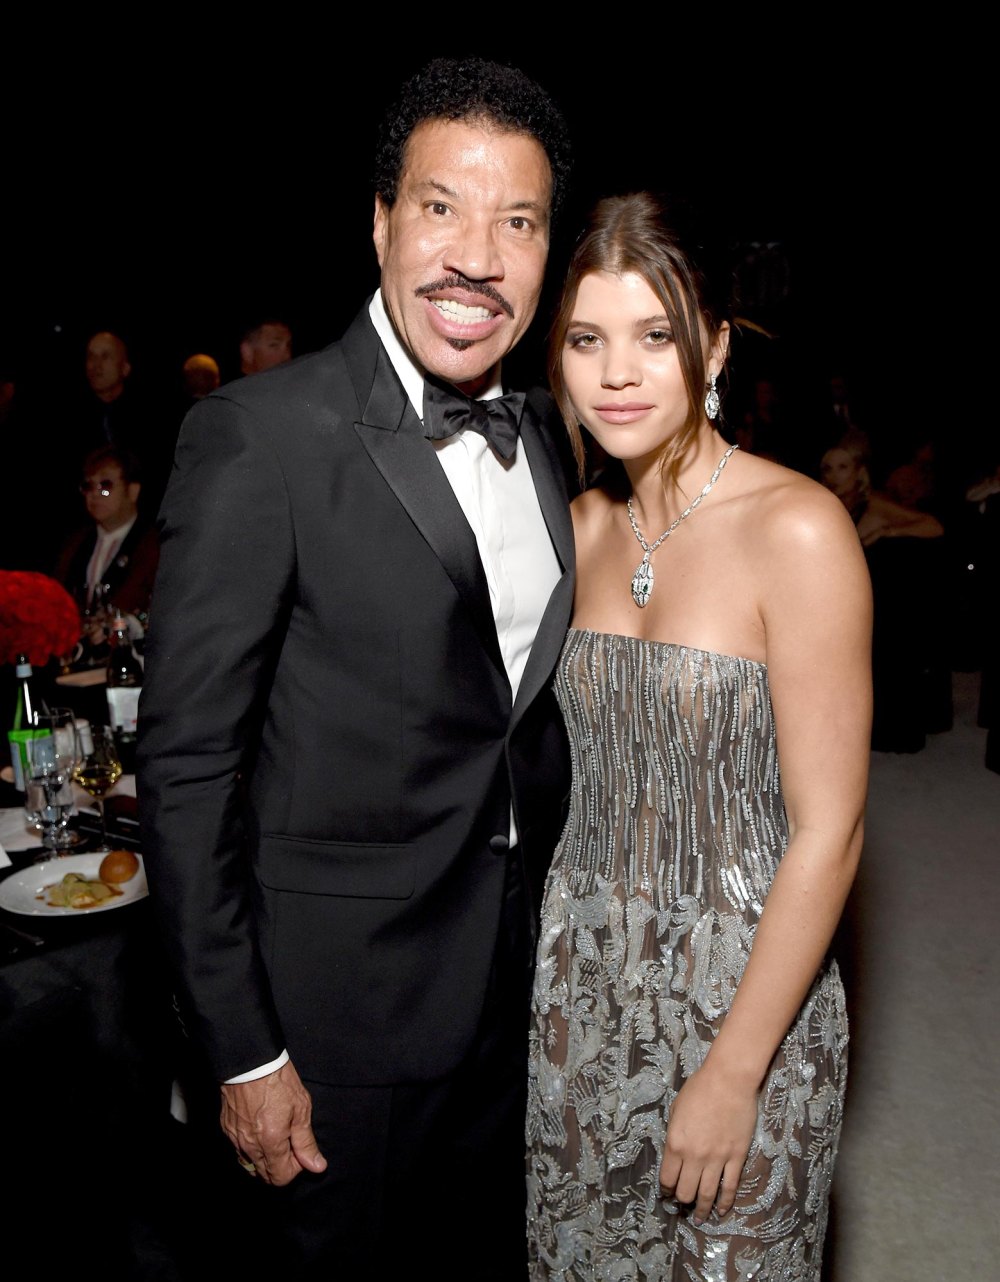 Lionel Richie is thrilled about daughter Sofia's first pregnancy